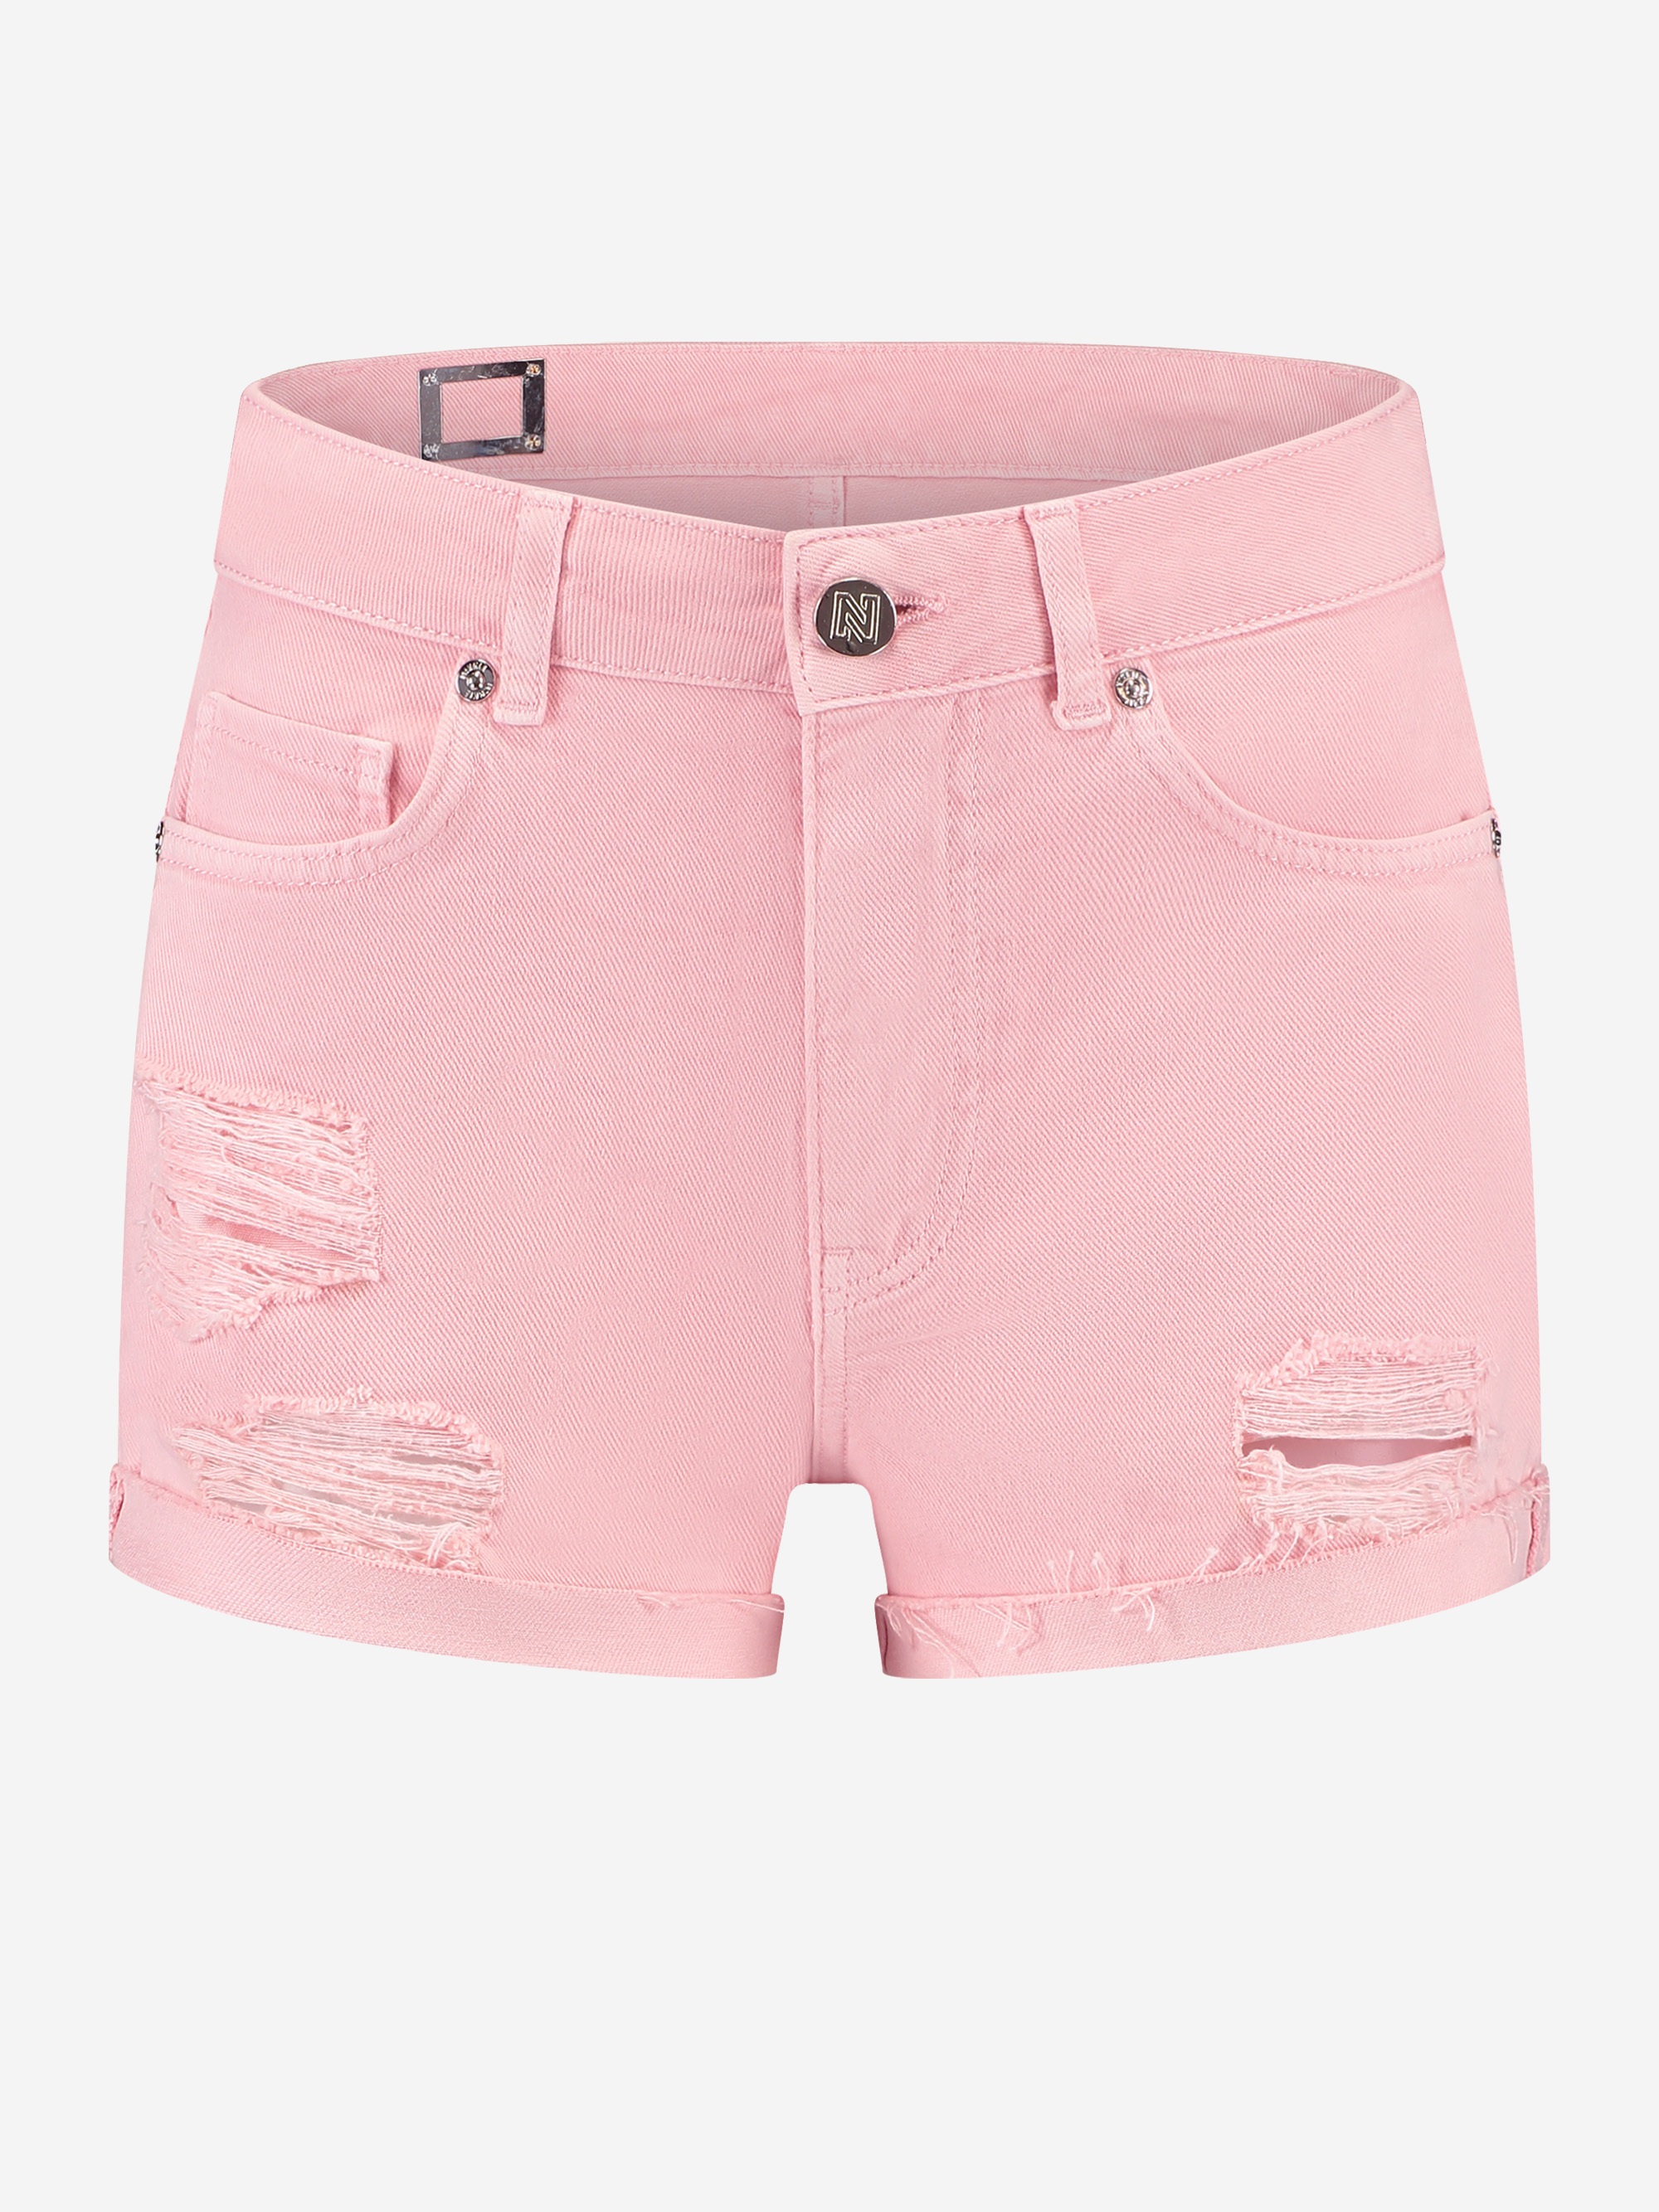 Brentwood Shorts